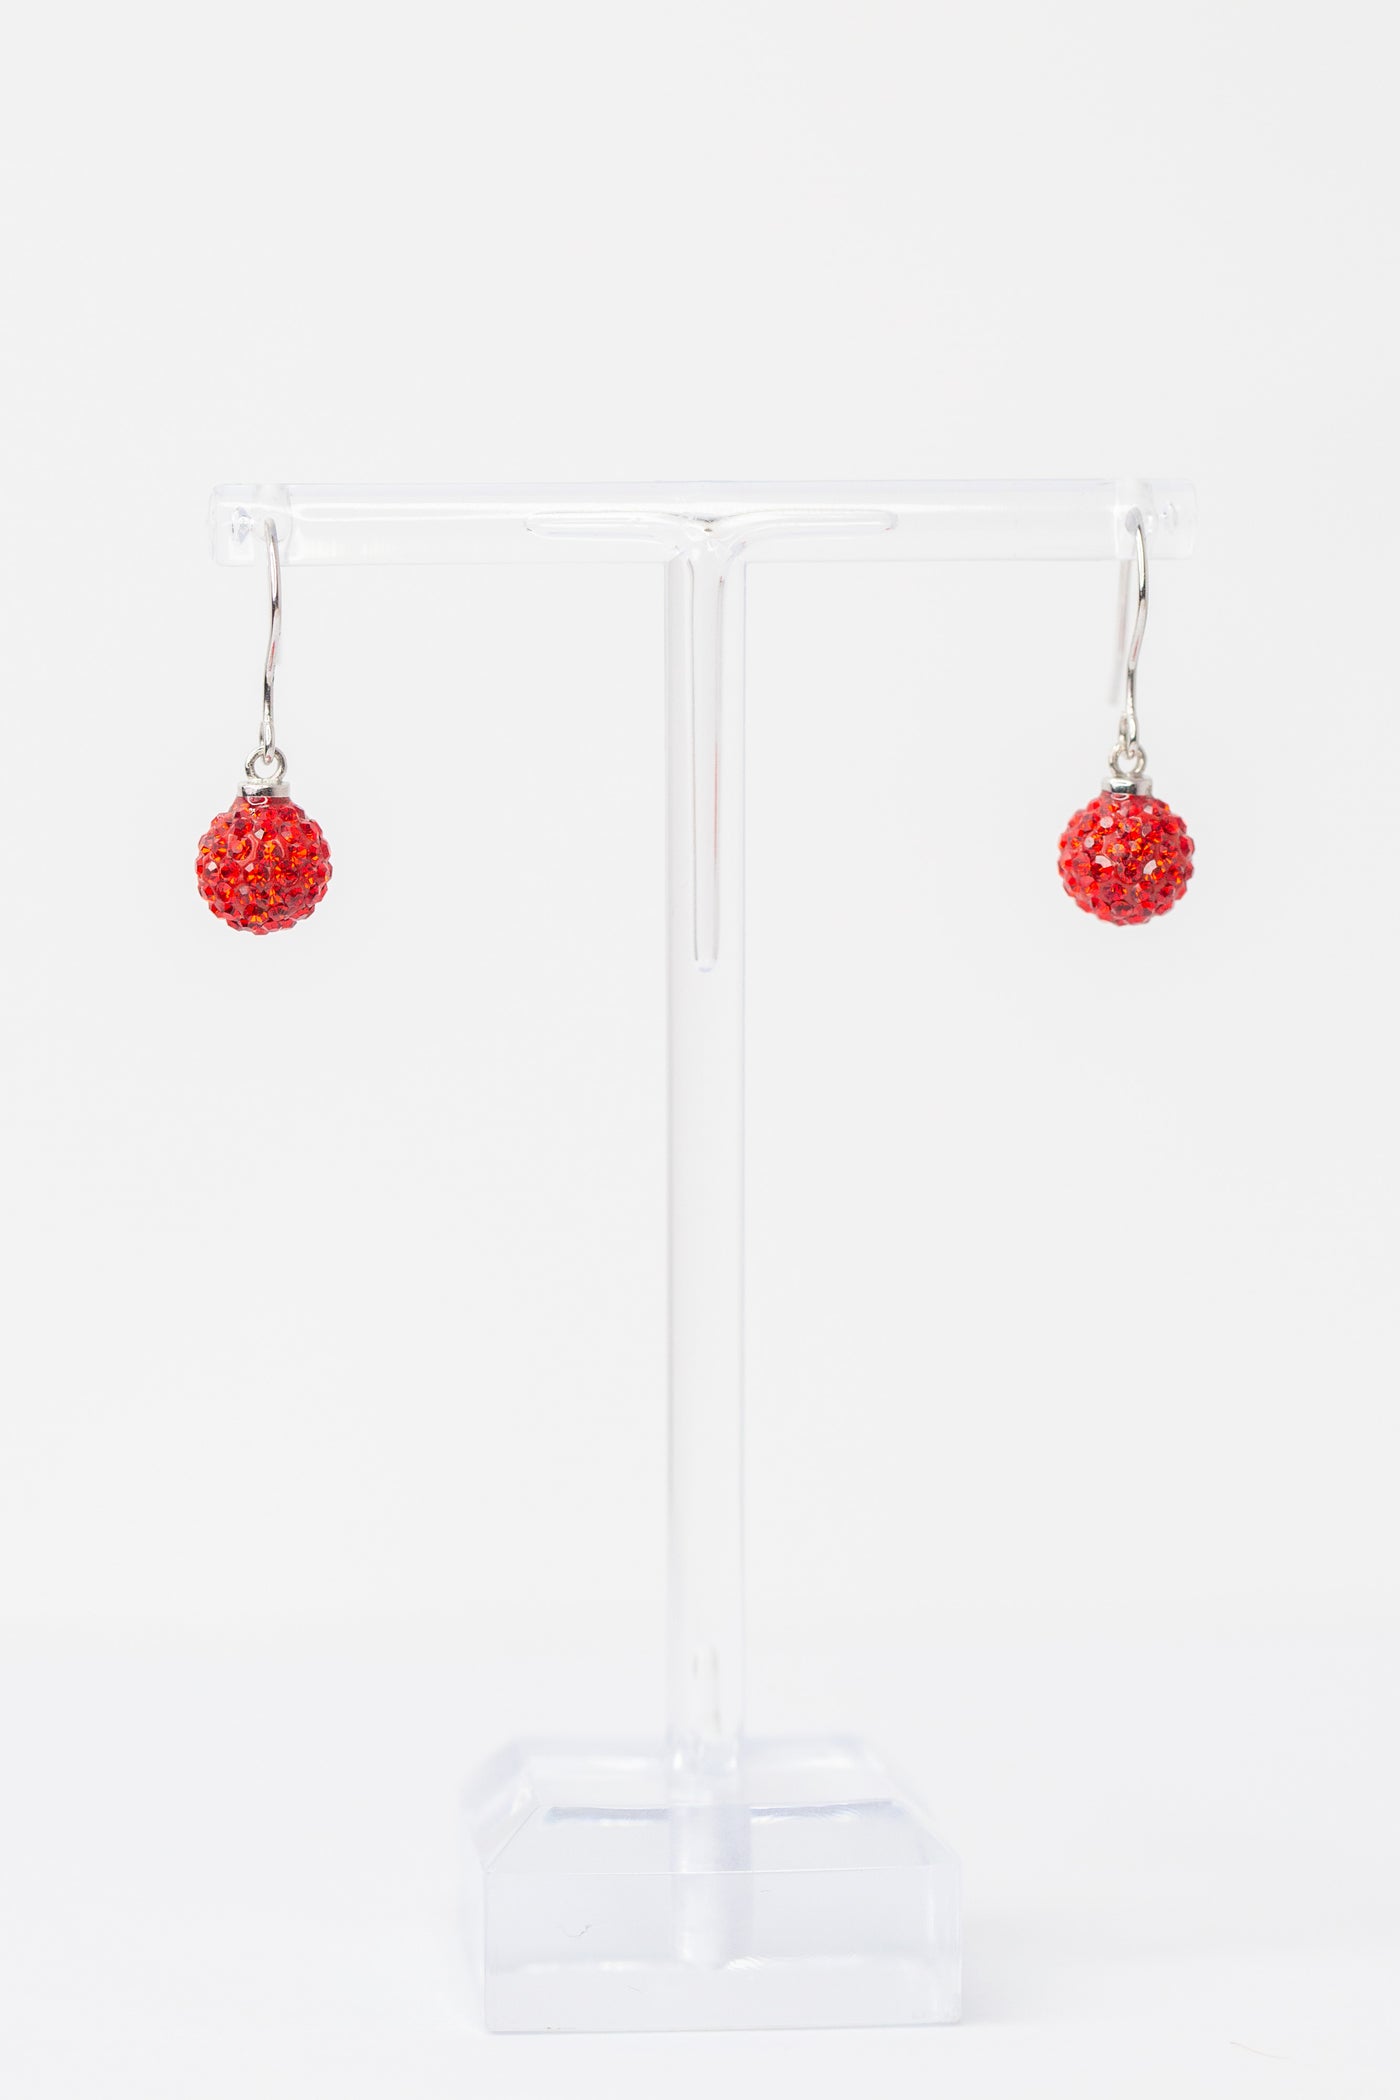 Dangling Red Ball Ornament Crystal Sterling Silver Earrings  | Annie and Sisters